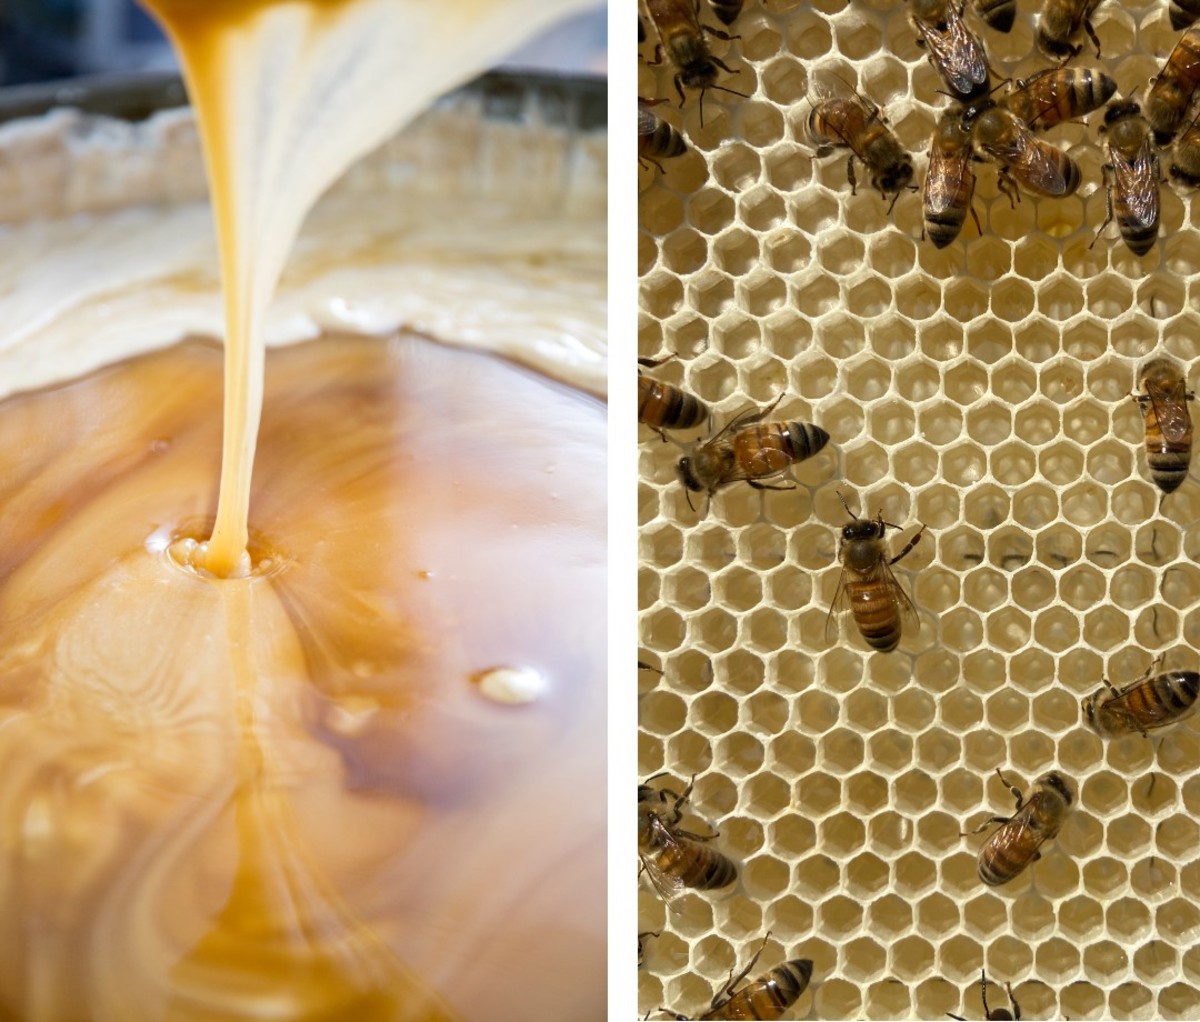 Raw honey and bees on honeycomb